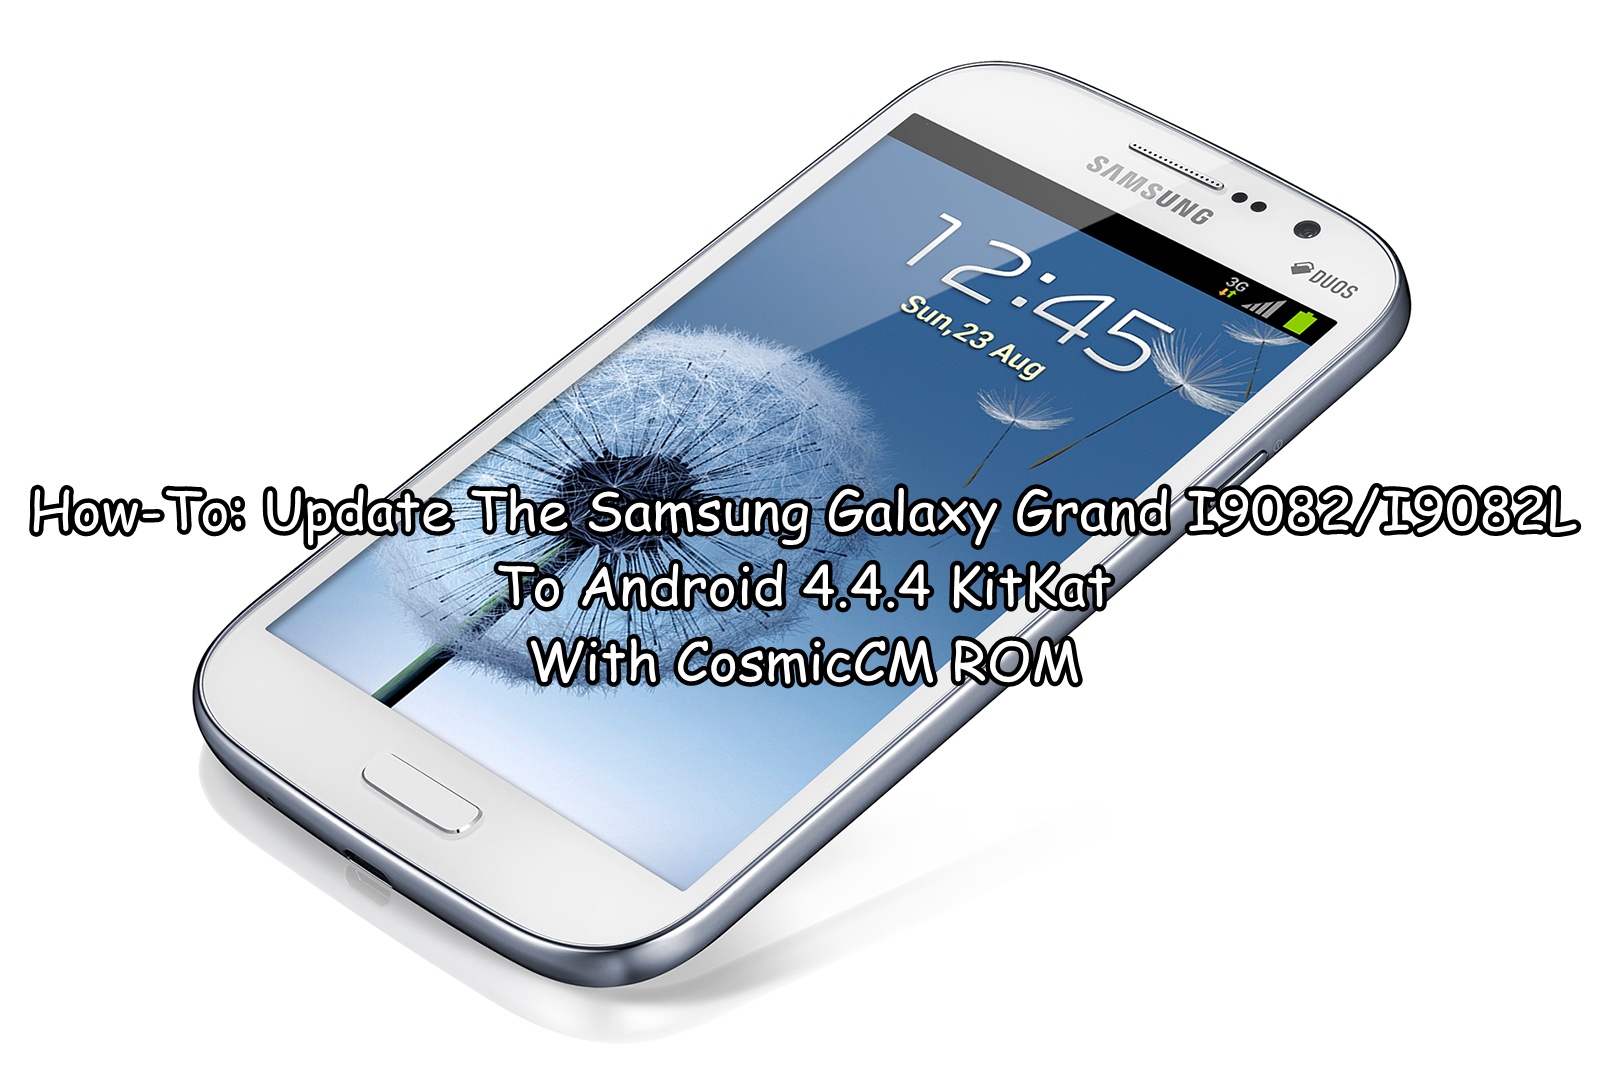 HowTo Update The Samsung Galaxy Grand I9082/I9082L To Android 4.4.4